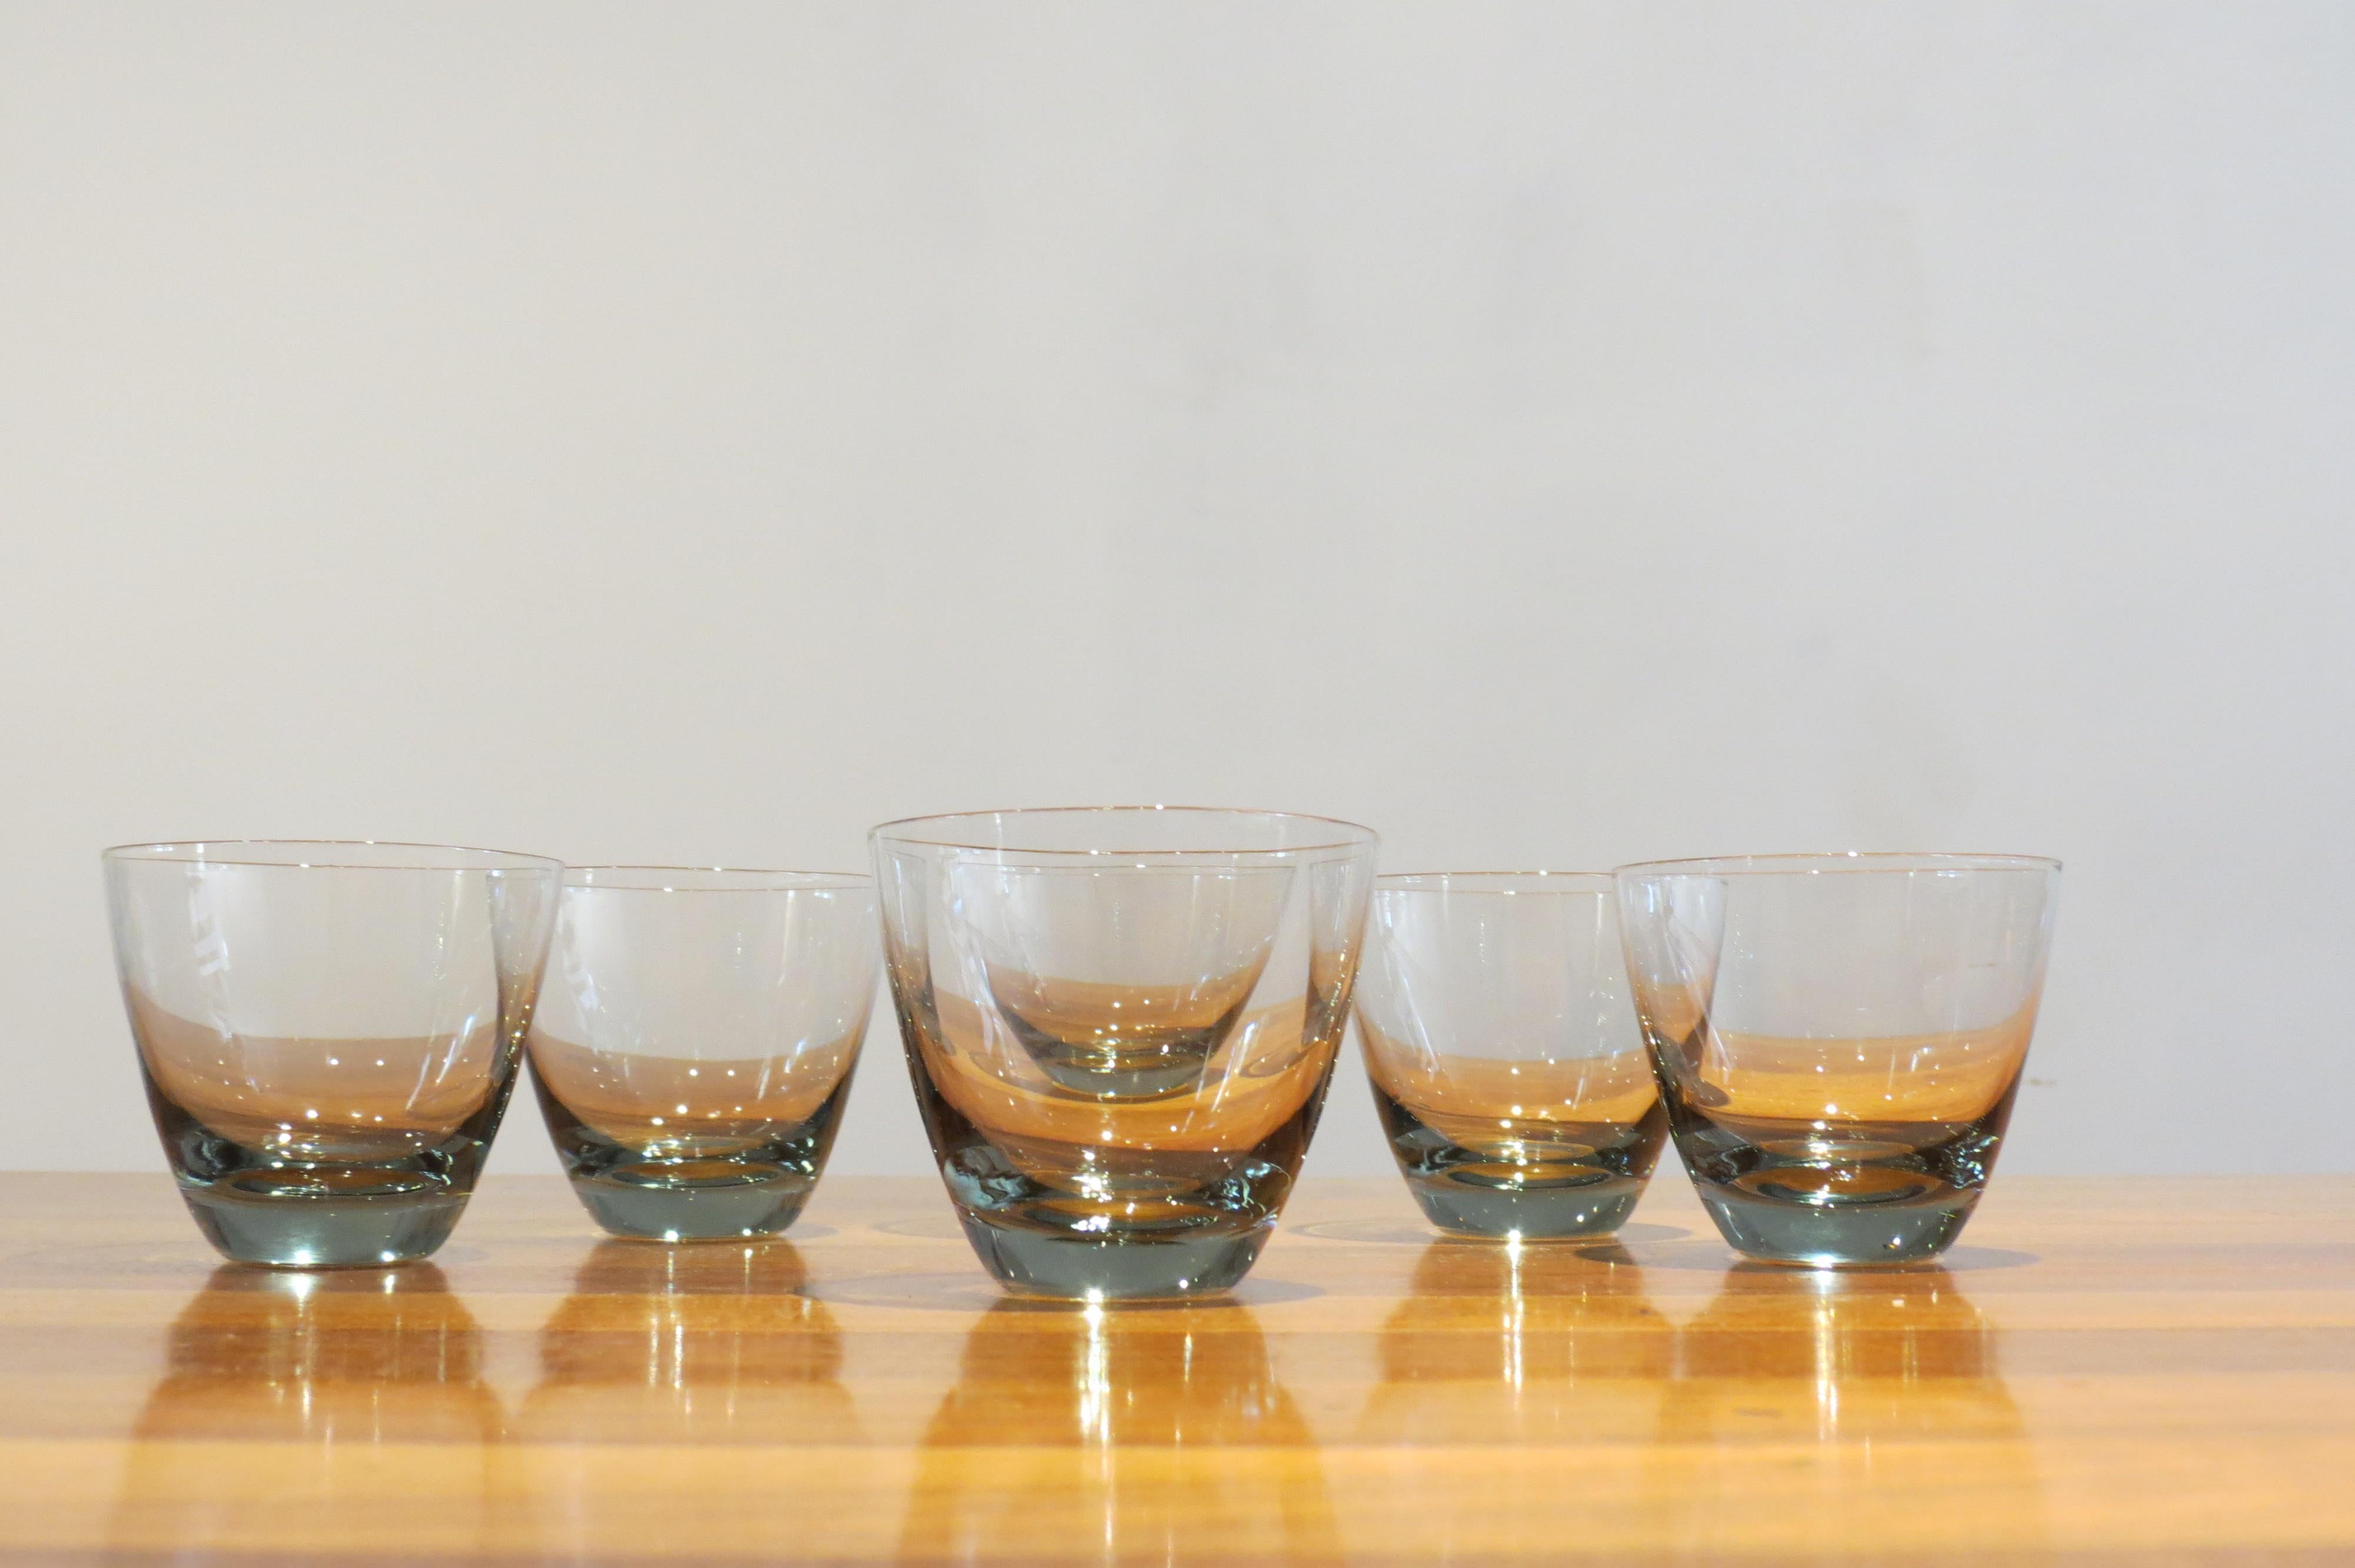 A set of six vintage Holmegaard glasses.
Designed by Per Lutken, model Copenhagen, 1950s.
Measures: 6cm tall, 7cm diameter widest point.
Smoked glass.
Good condition, two glasses have a blemish on the side of the glass, this probably appeared during